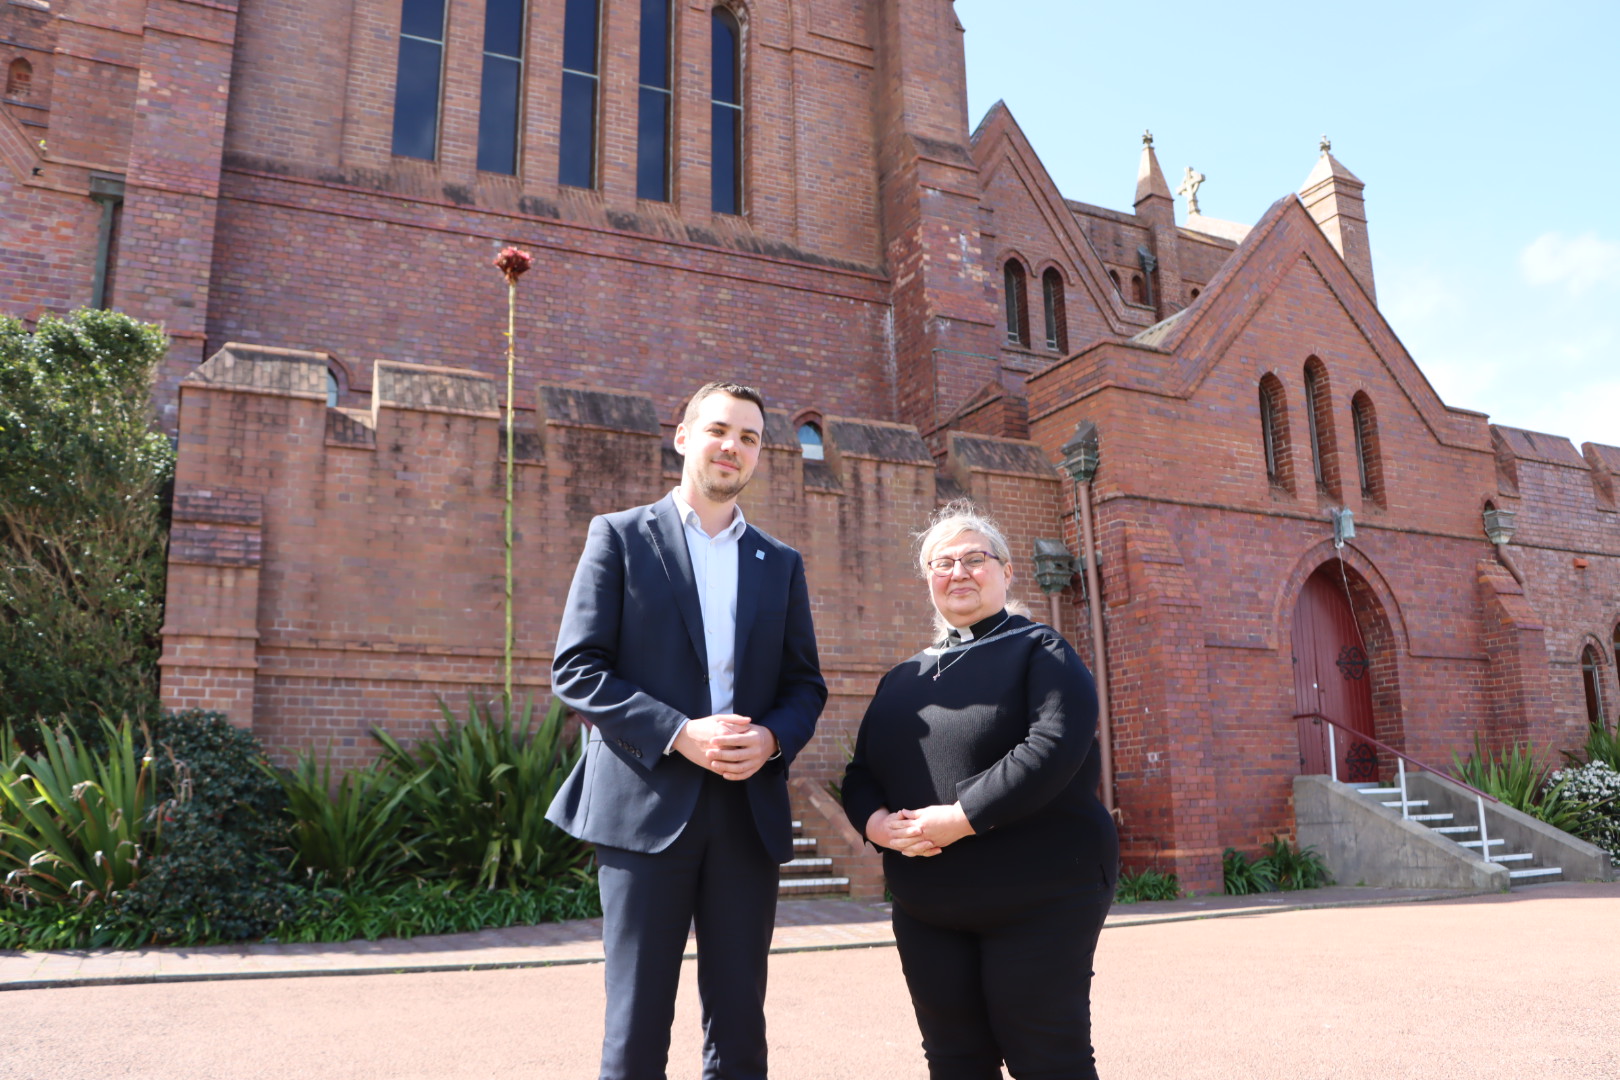 Deputy Lord Mayor Declan Clausen with Dean Katherine Bowyer at Christ Church Cathedral ahead of the memorial service this evening